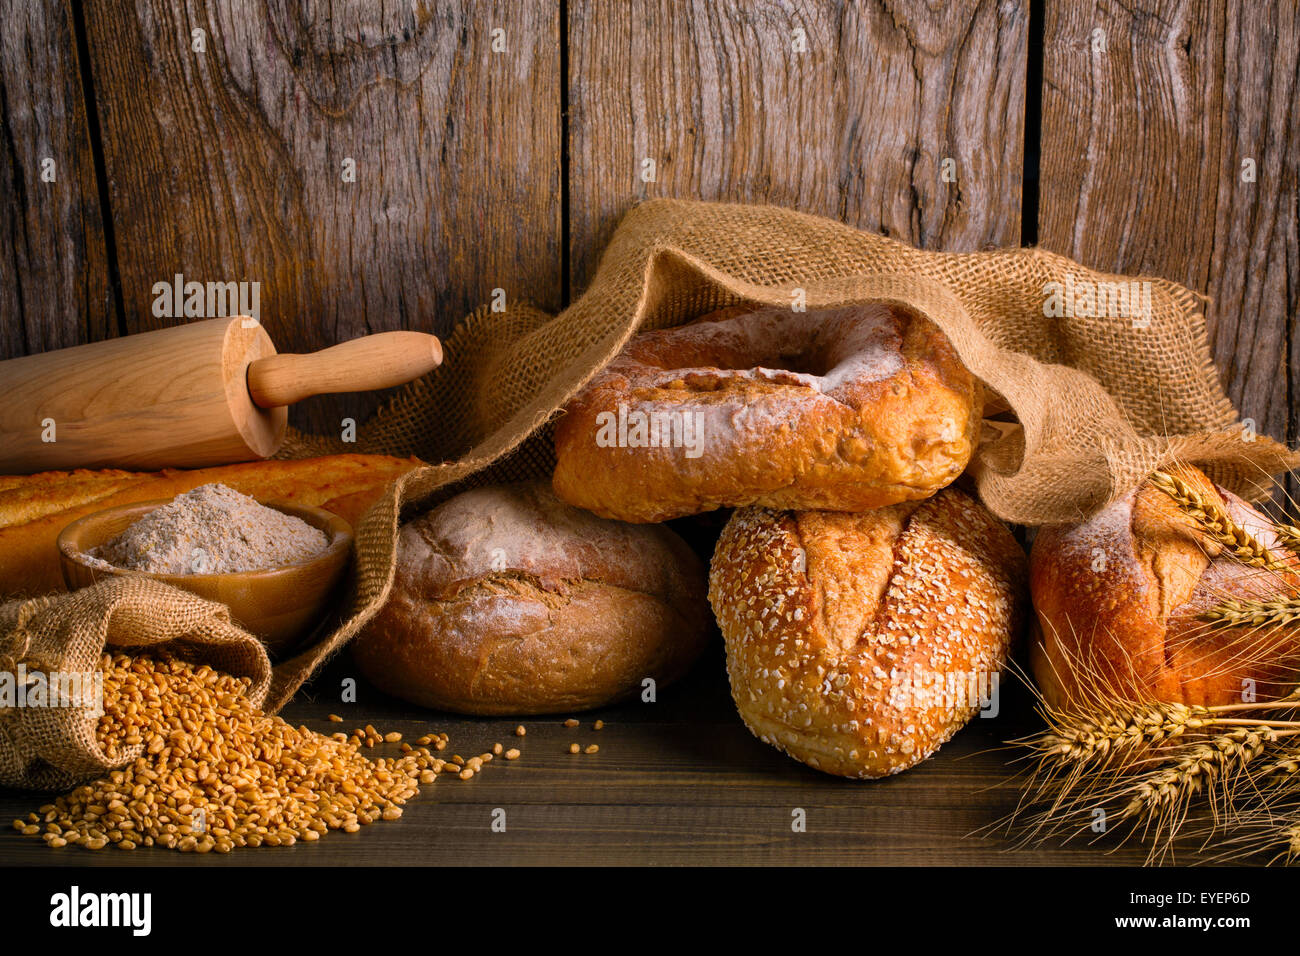 Bread with wheat grains Stock Photo